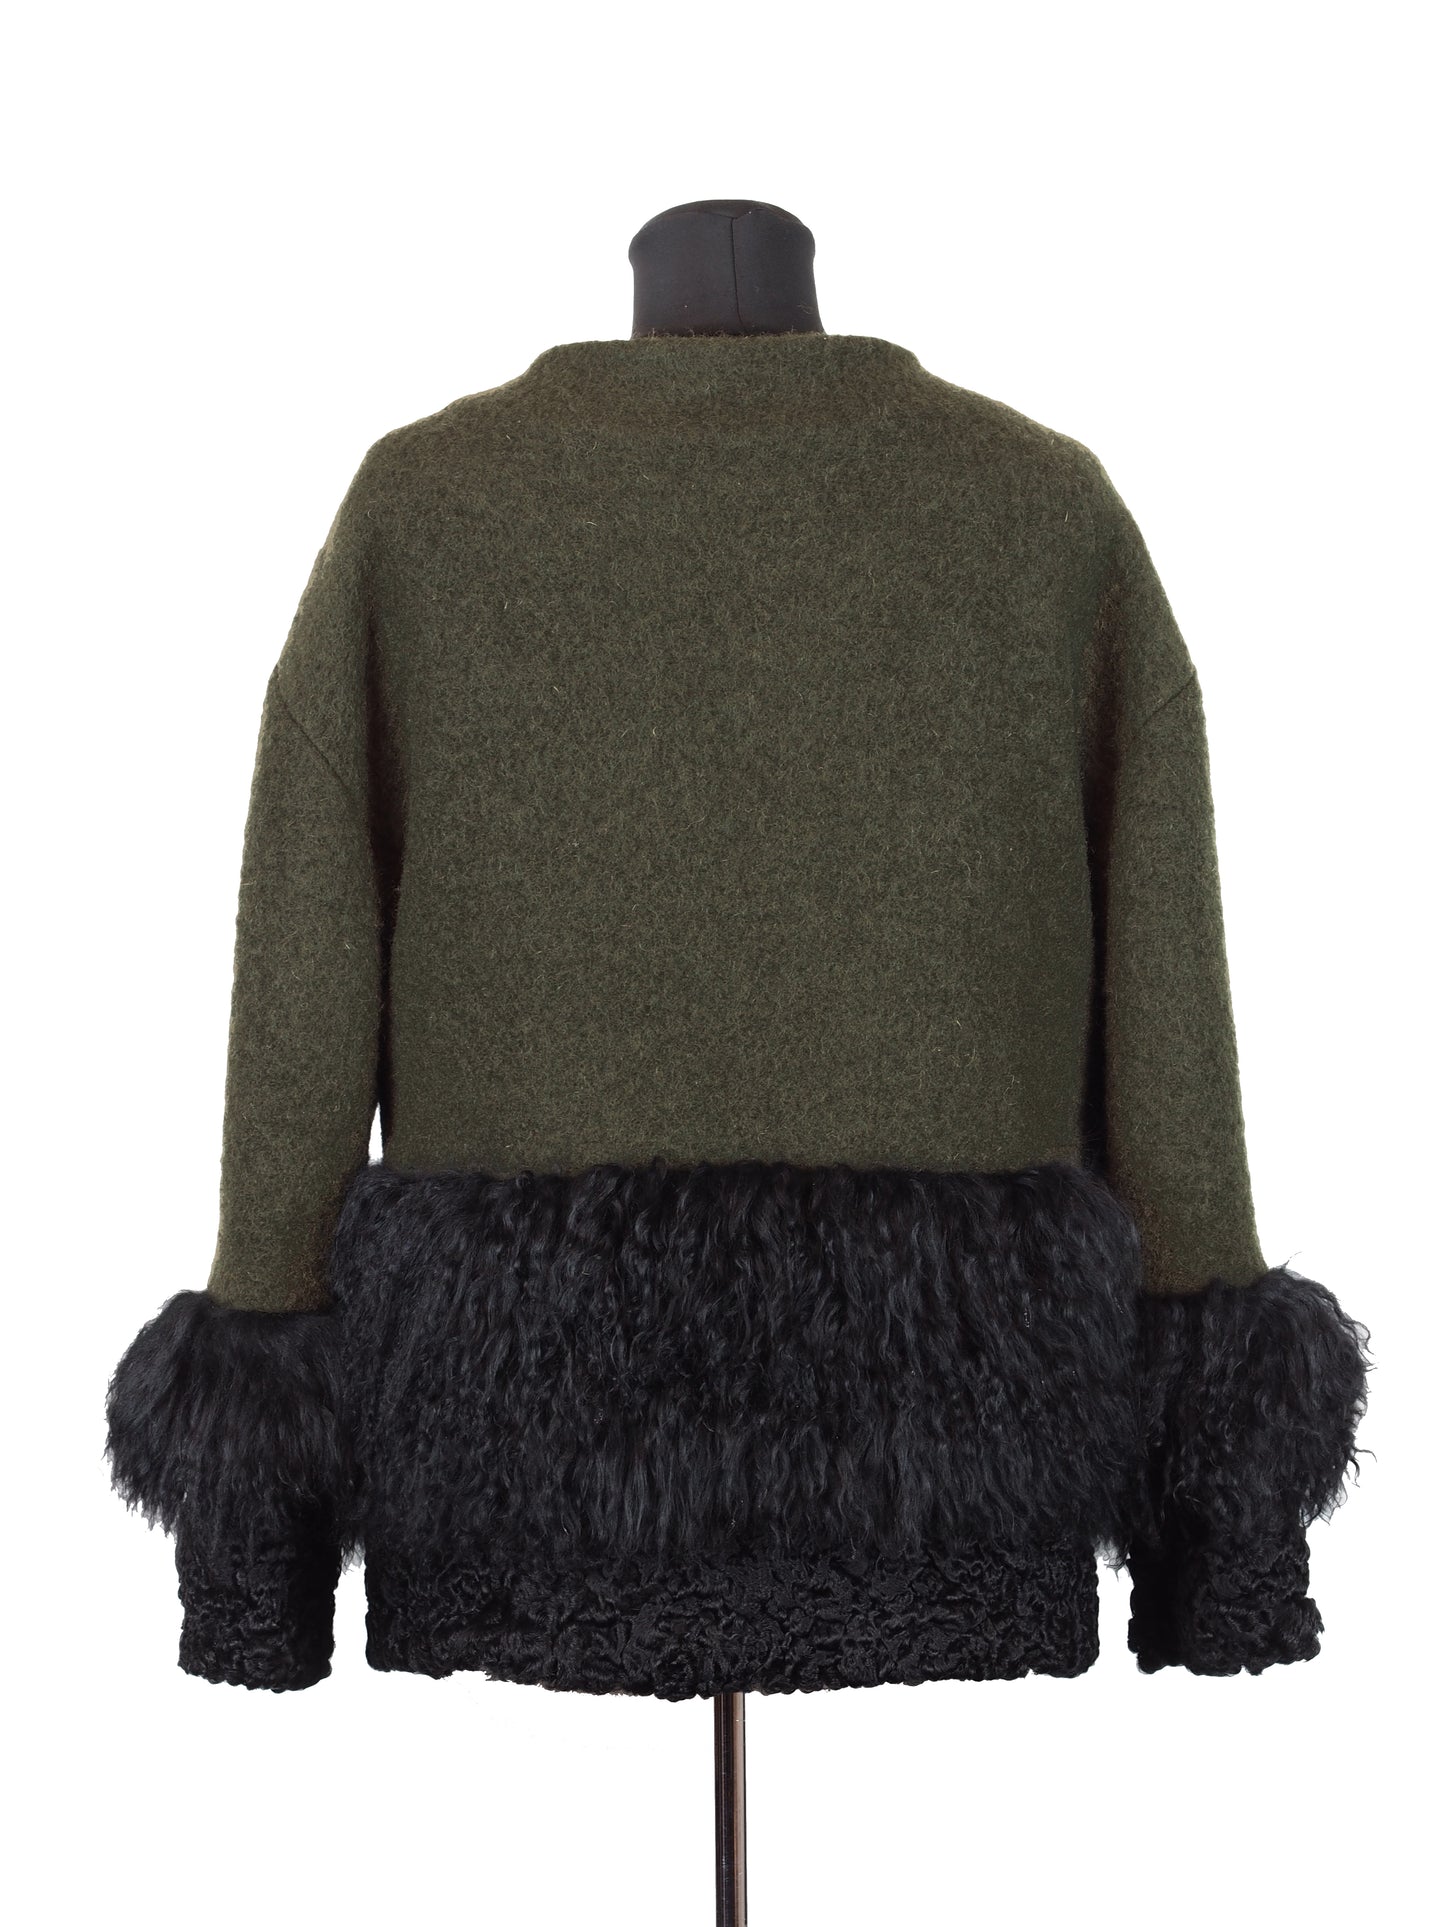 ONE OF A KIND OLIVE GREEN WOOL / FUR JACKET - CHRISTINA FISCHER